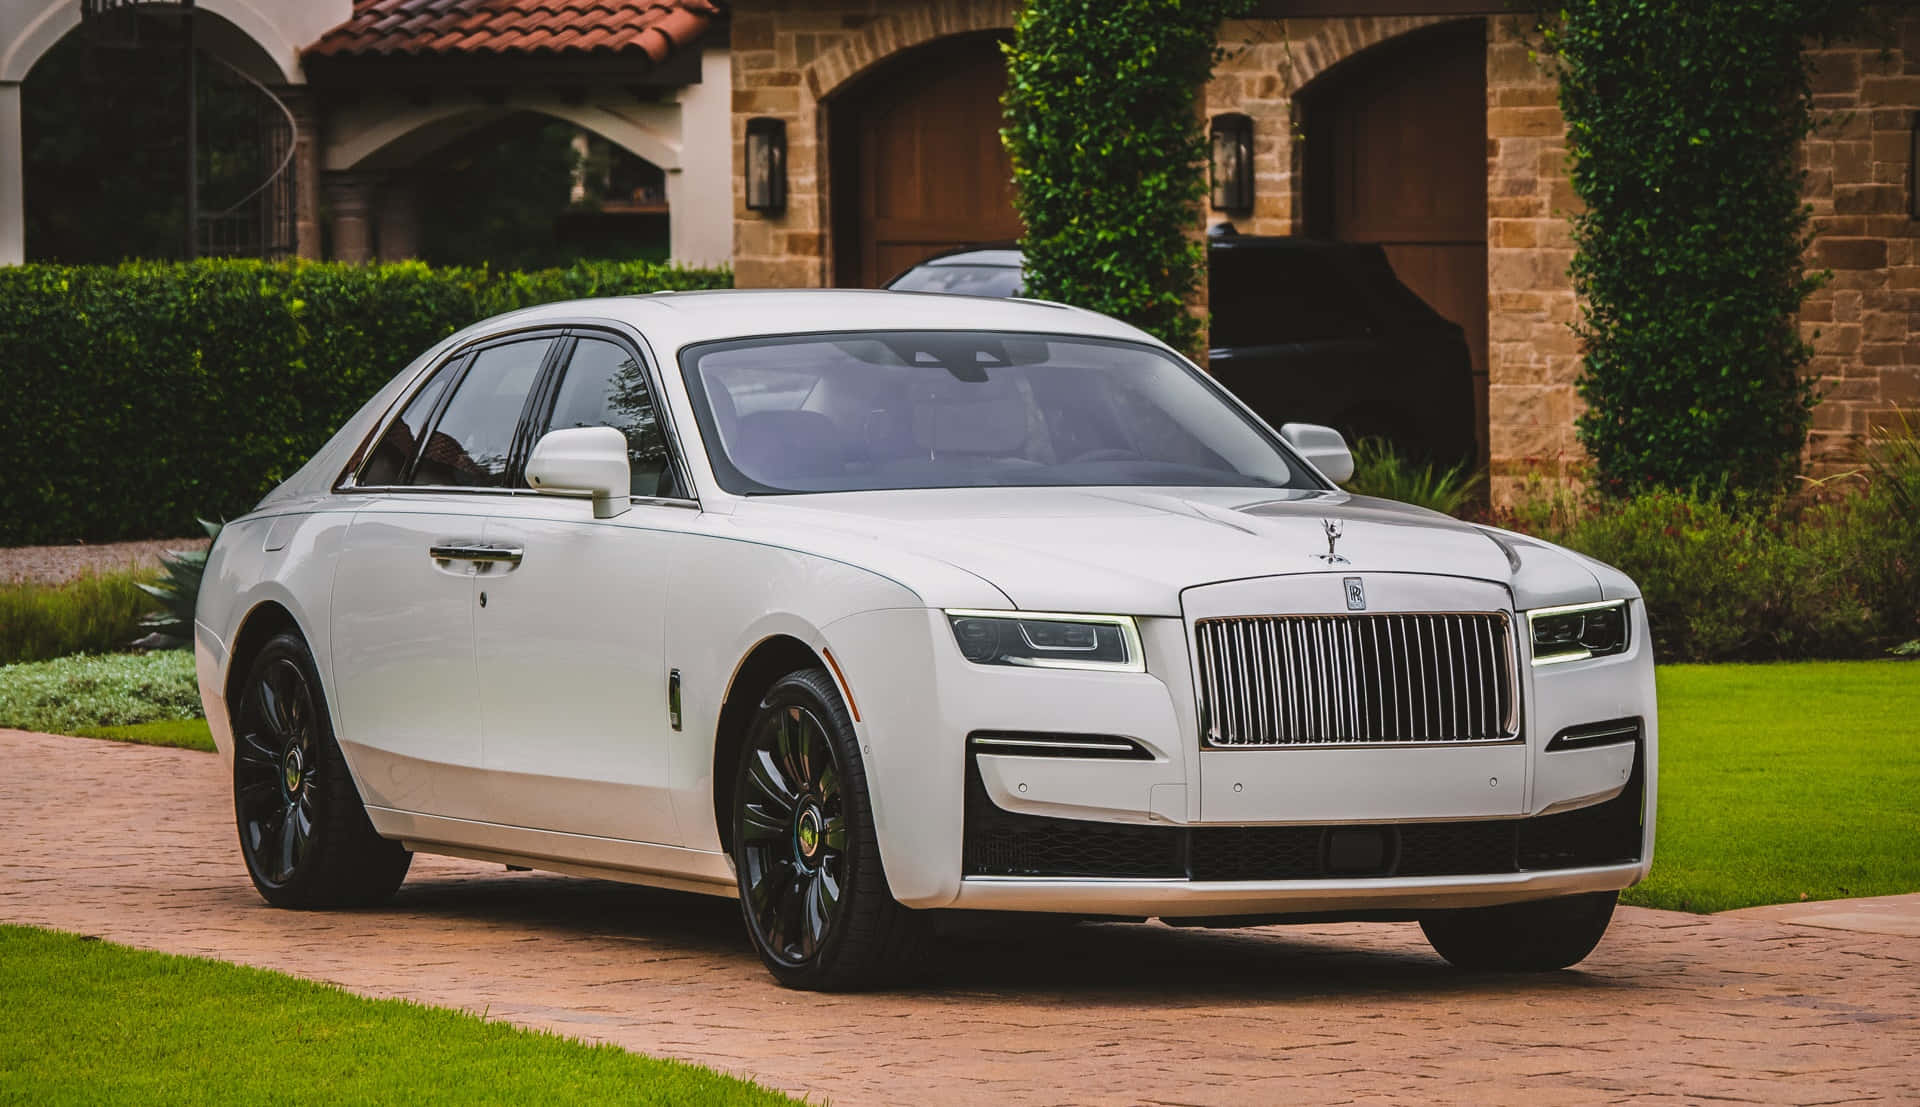 The Ultimate Expression Of Luxury – Rolls Royce Ghost Wallpaper